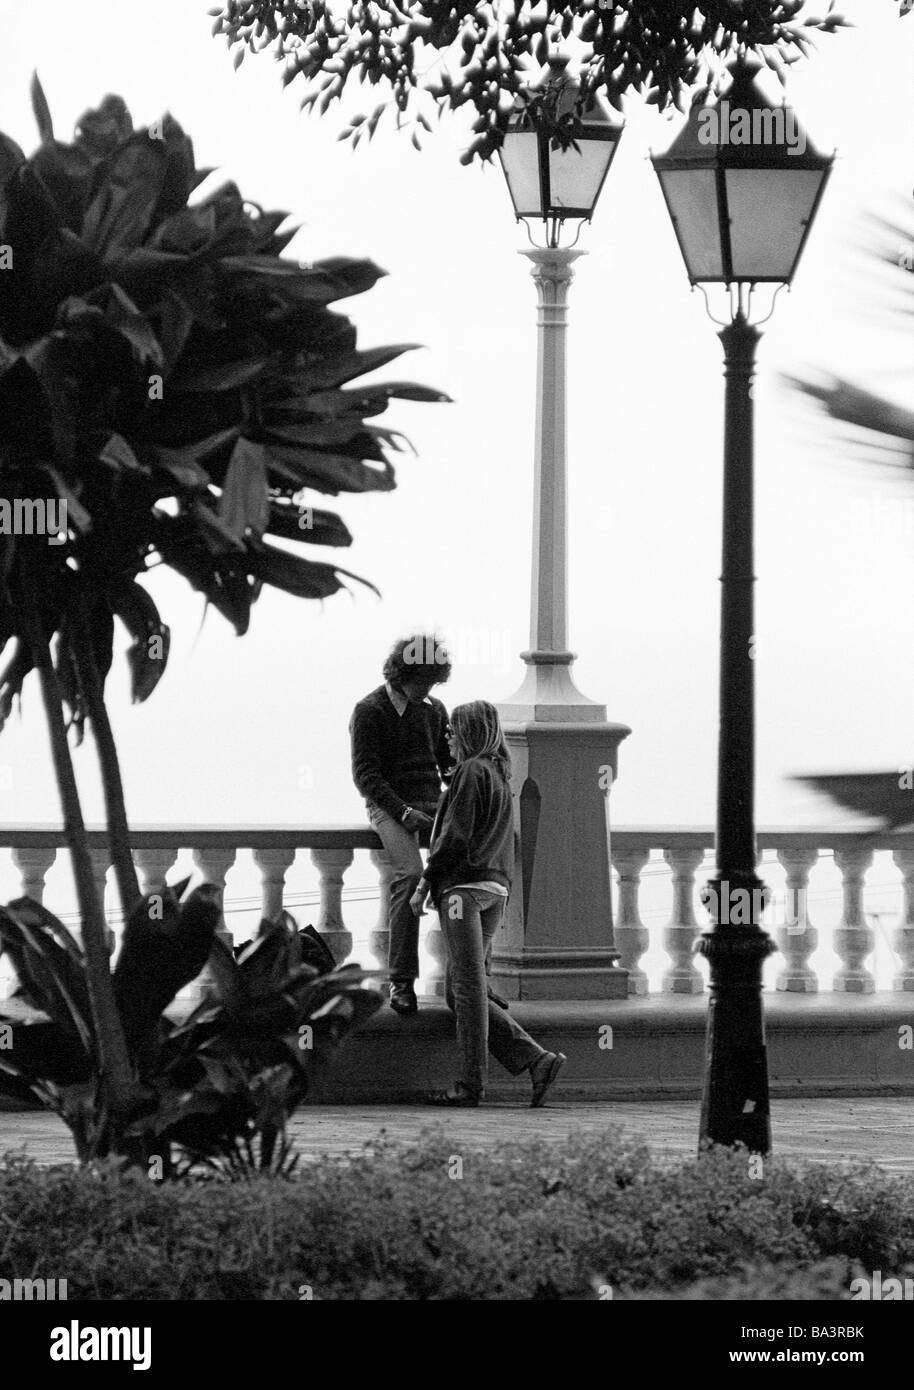 Eighties, black and white photo, people, young couple stands close together, affection, idyllic, lanterns, balusters, aged 17 to 20 years, Spain, Canary Islands, Canaries, Tenerife, La Orotava Stock Photo